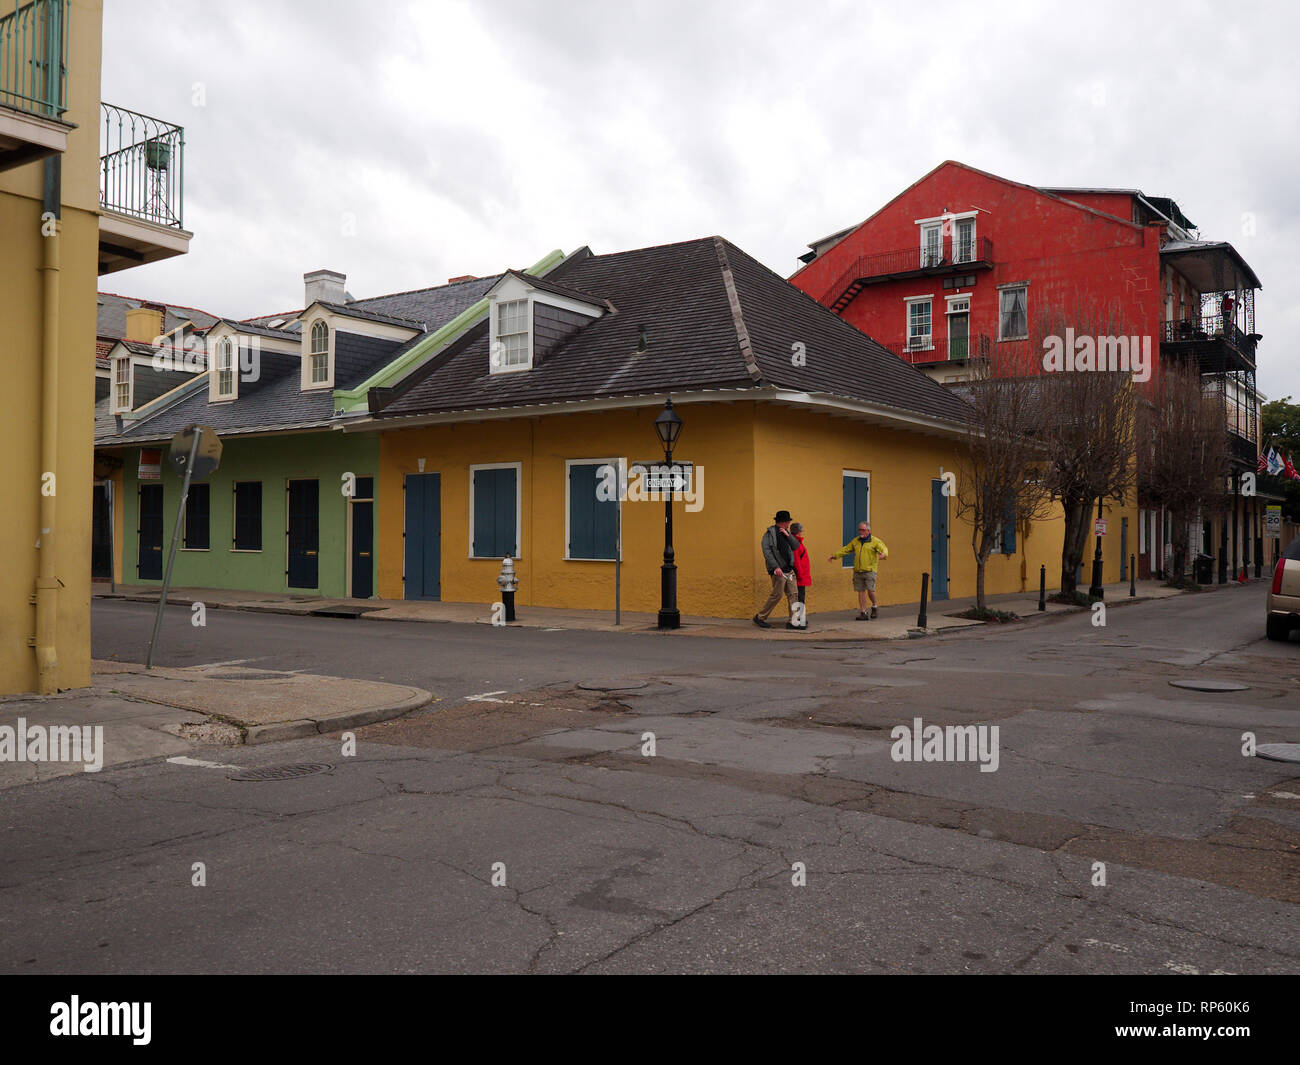 New Orleans, Louisiana, USA - 2018: A house at the French Quarter in the typical architectural style of that district. Stock Photo